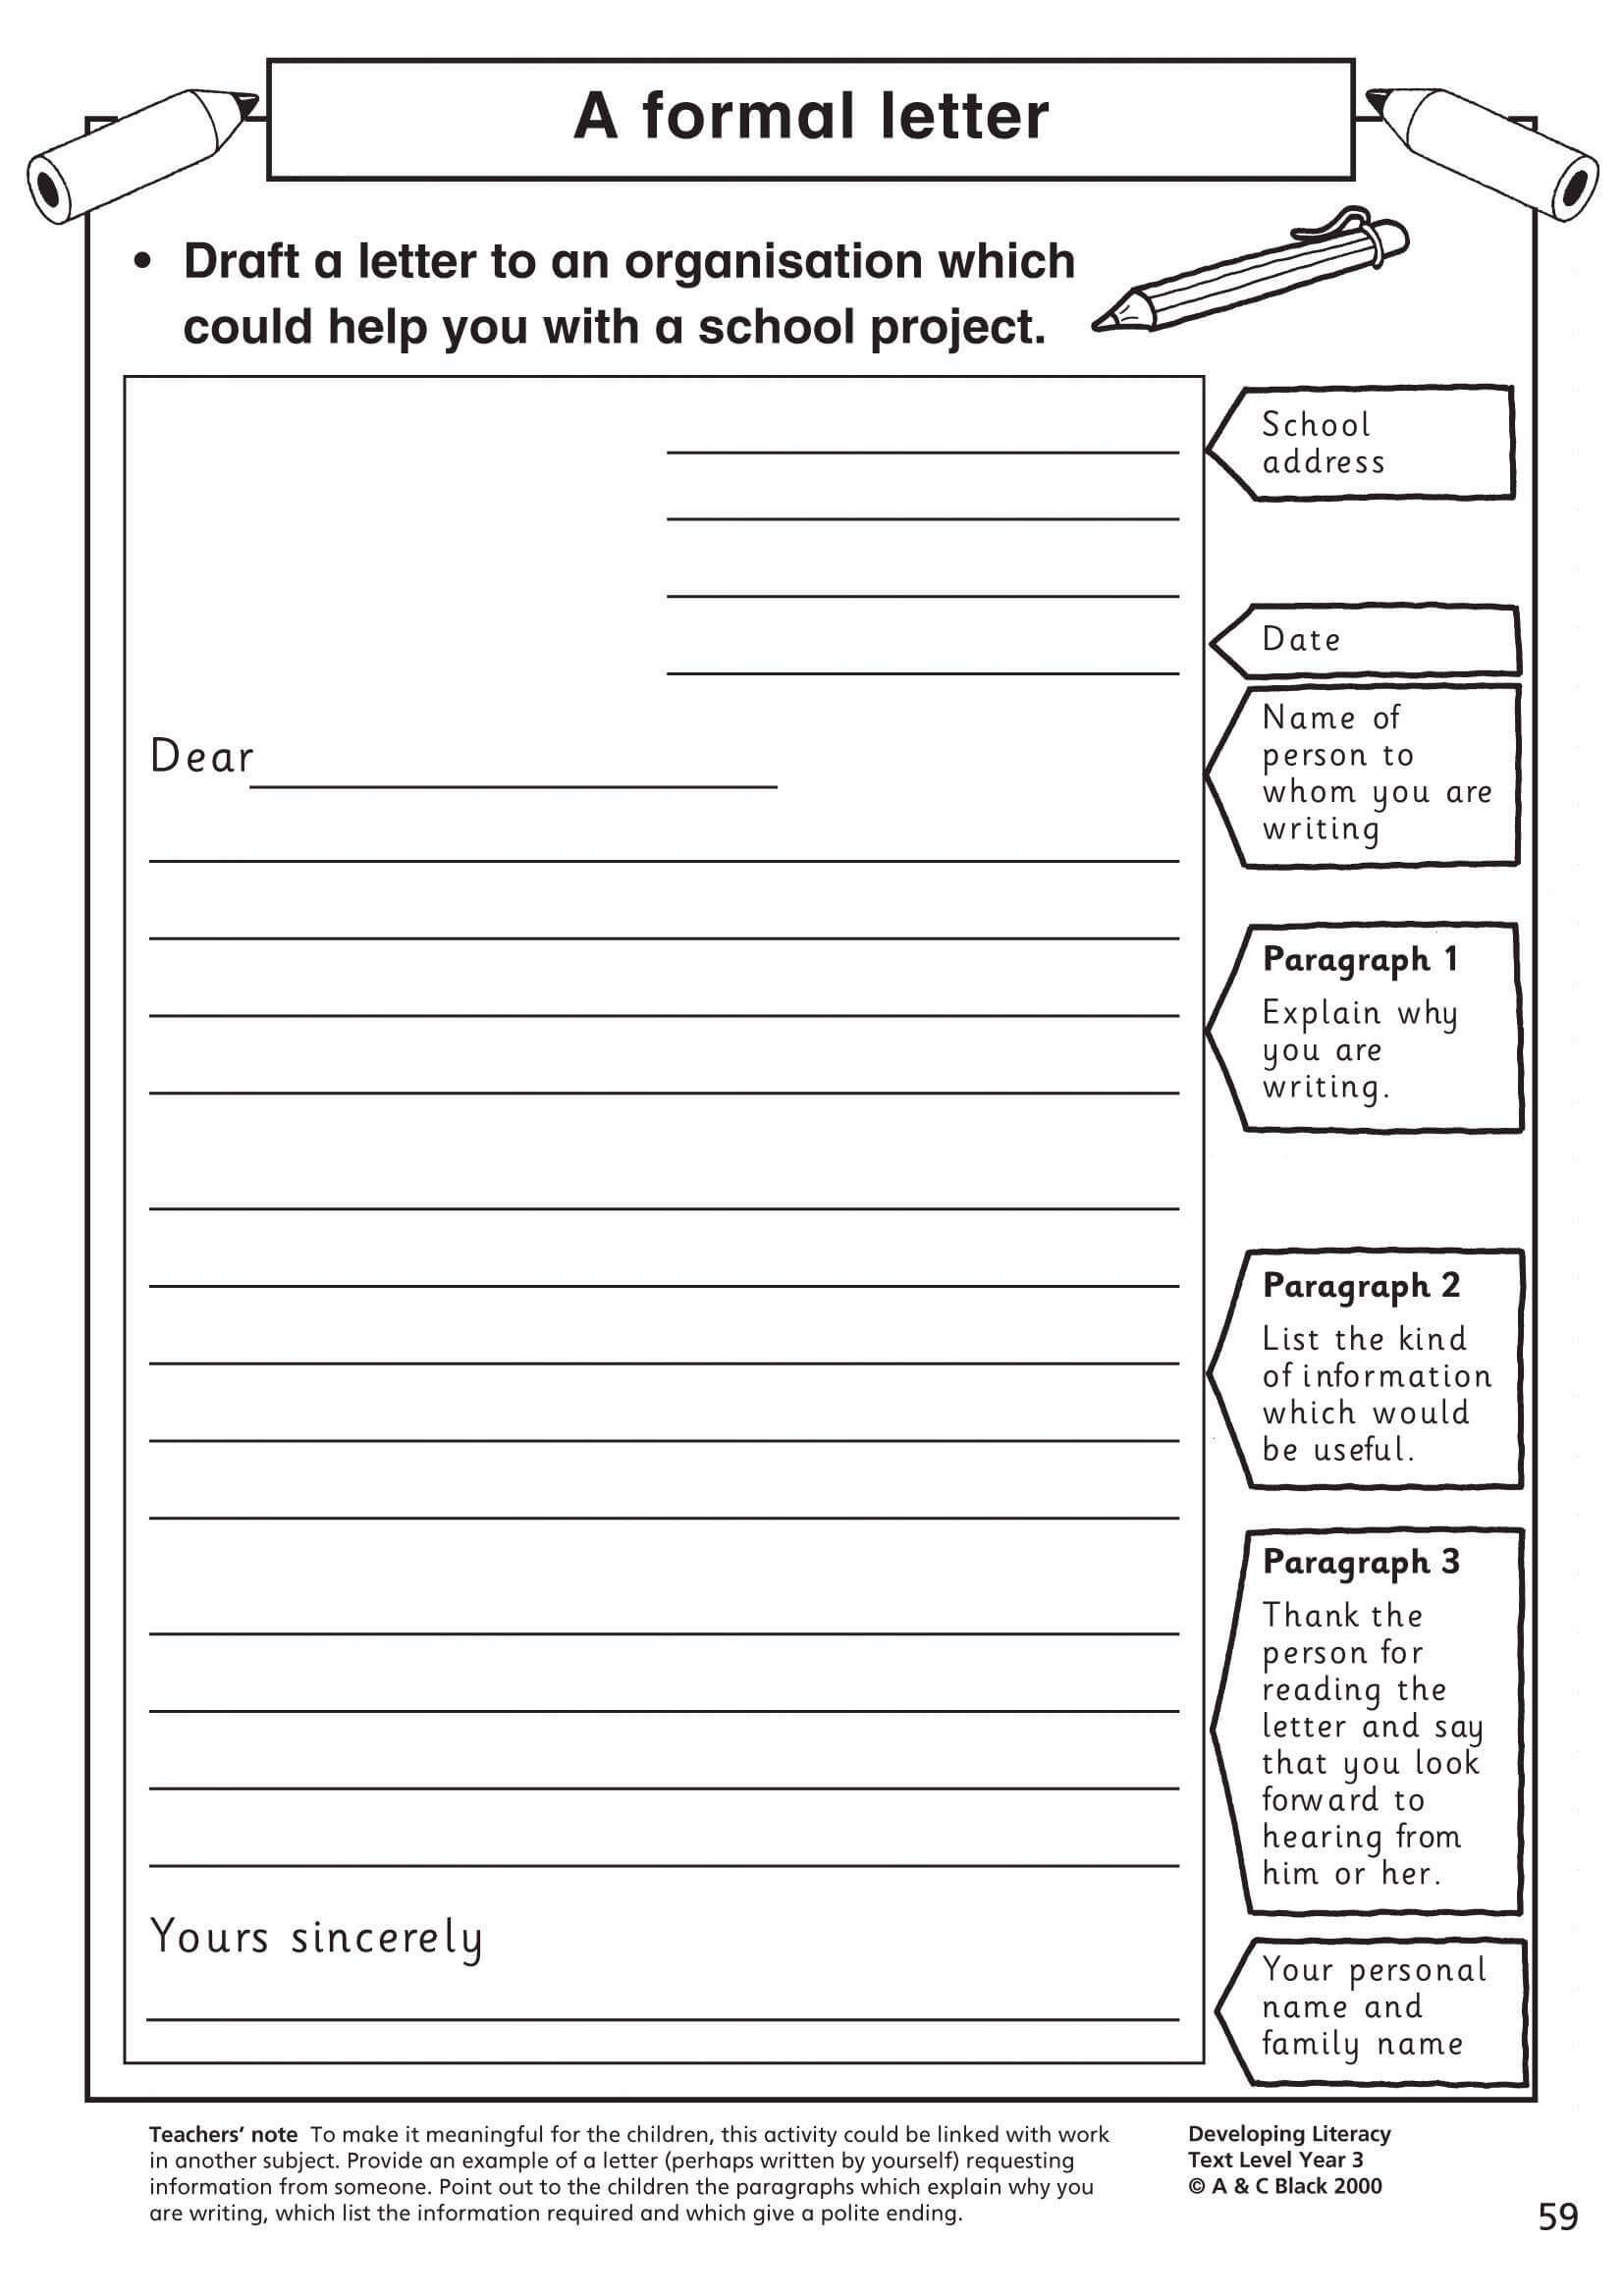 A Formal Letter | A Formal Letter, Informal Letter Writing Intended For Blank Letter Writing Template For Kids